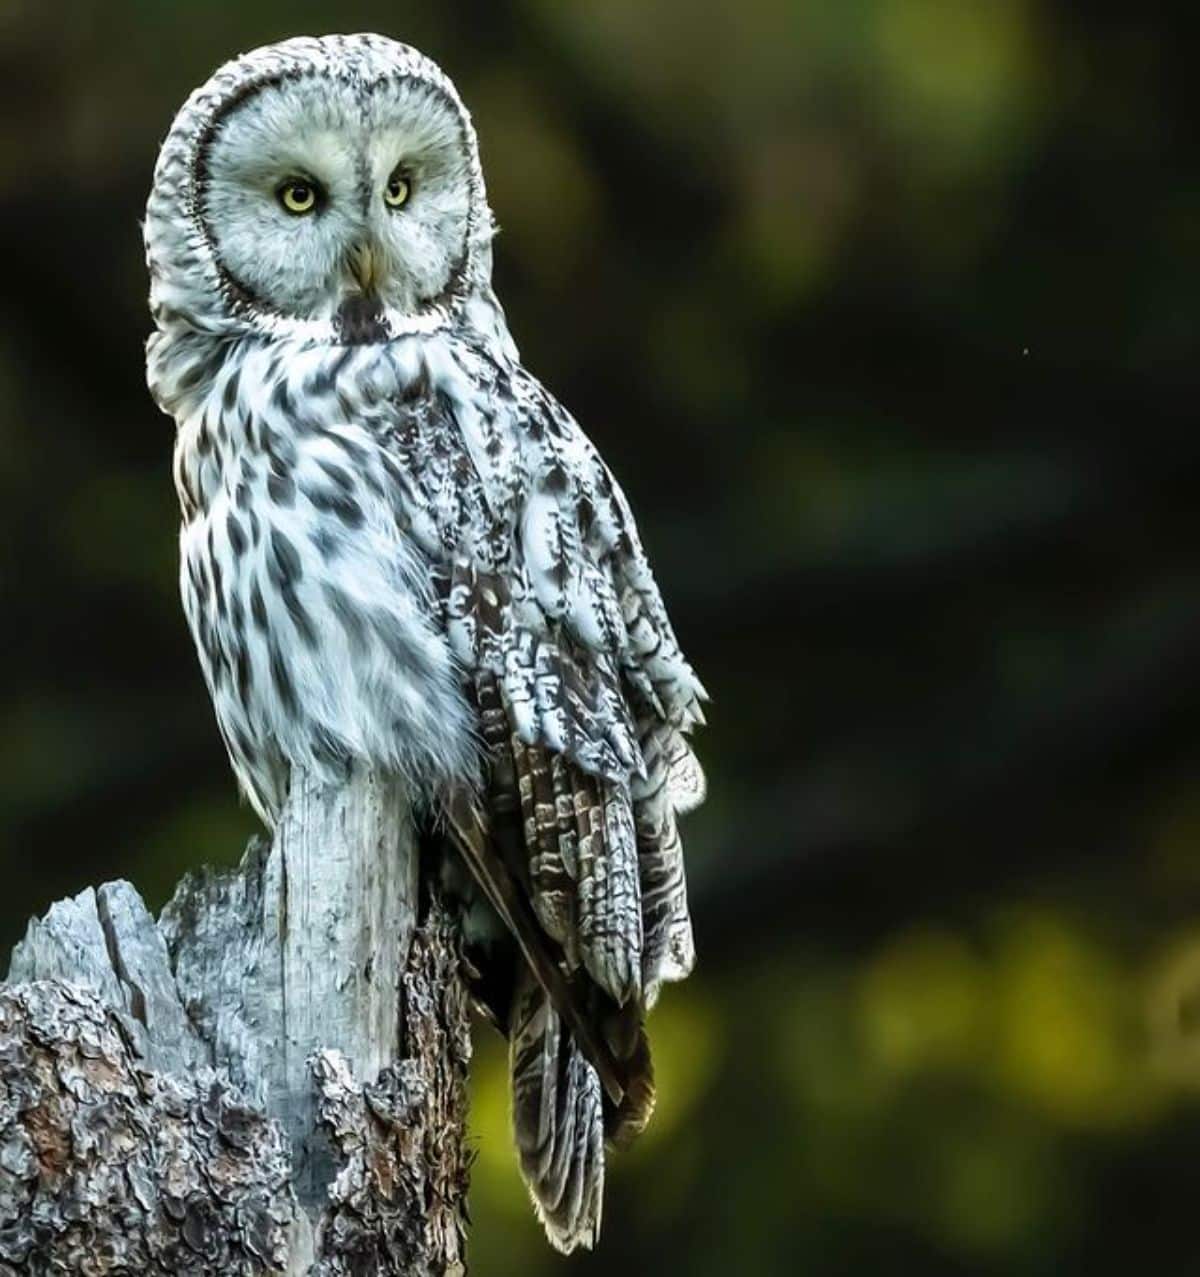 A beautiful white-brown owl perched on a tree log.